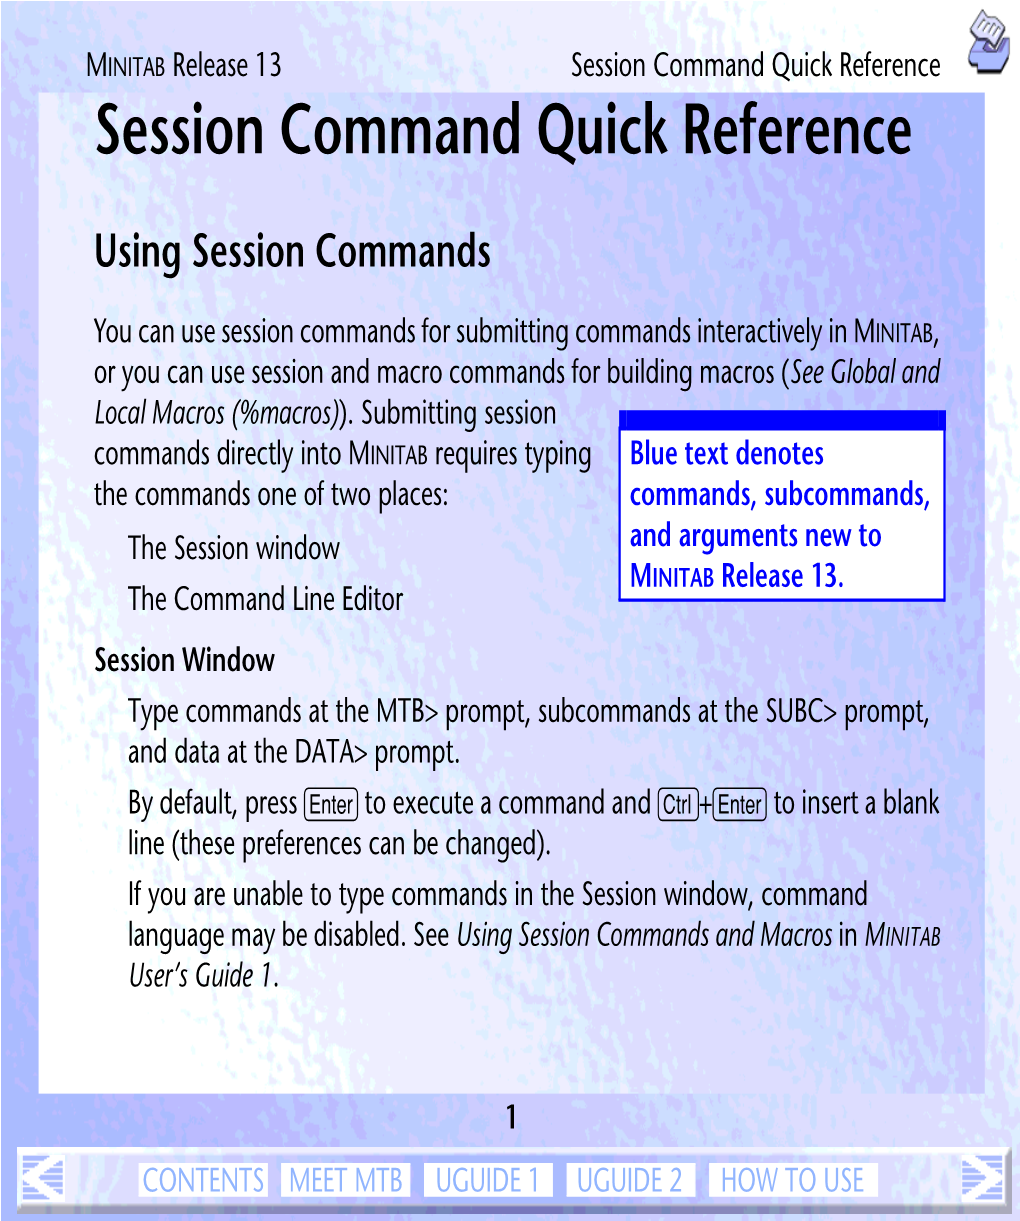 Session Command Quick Reference Session Command Quick Reference